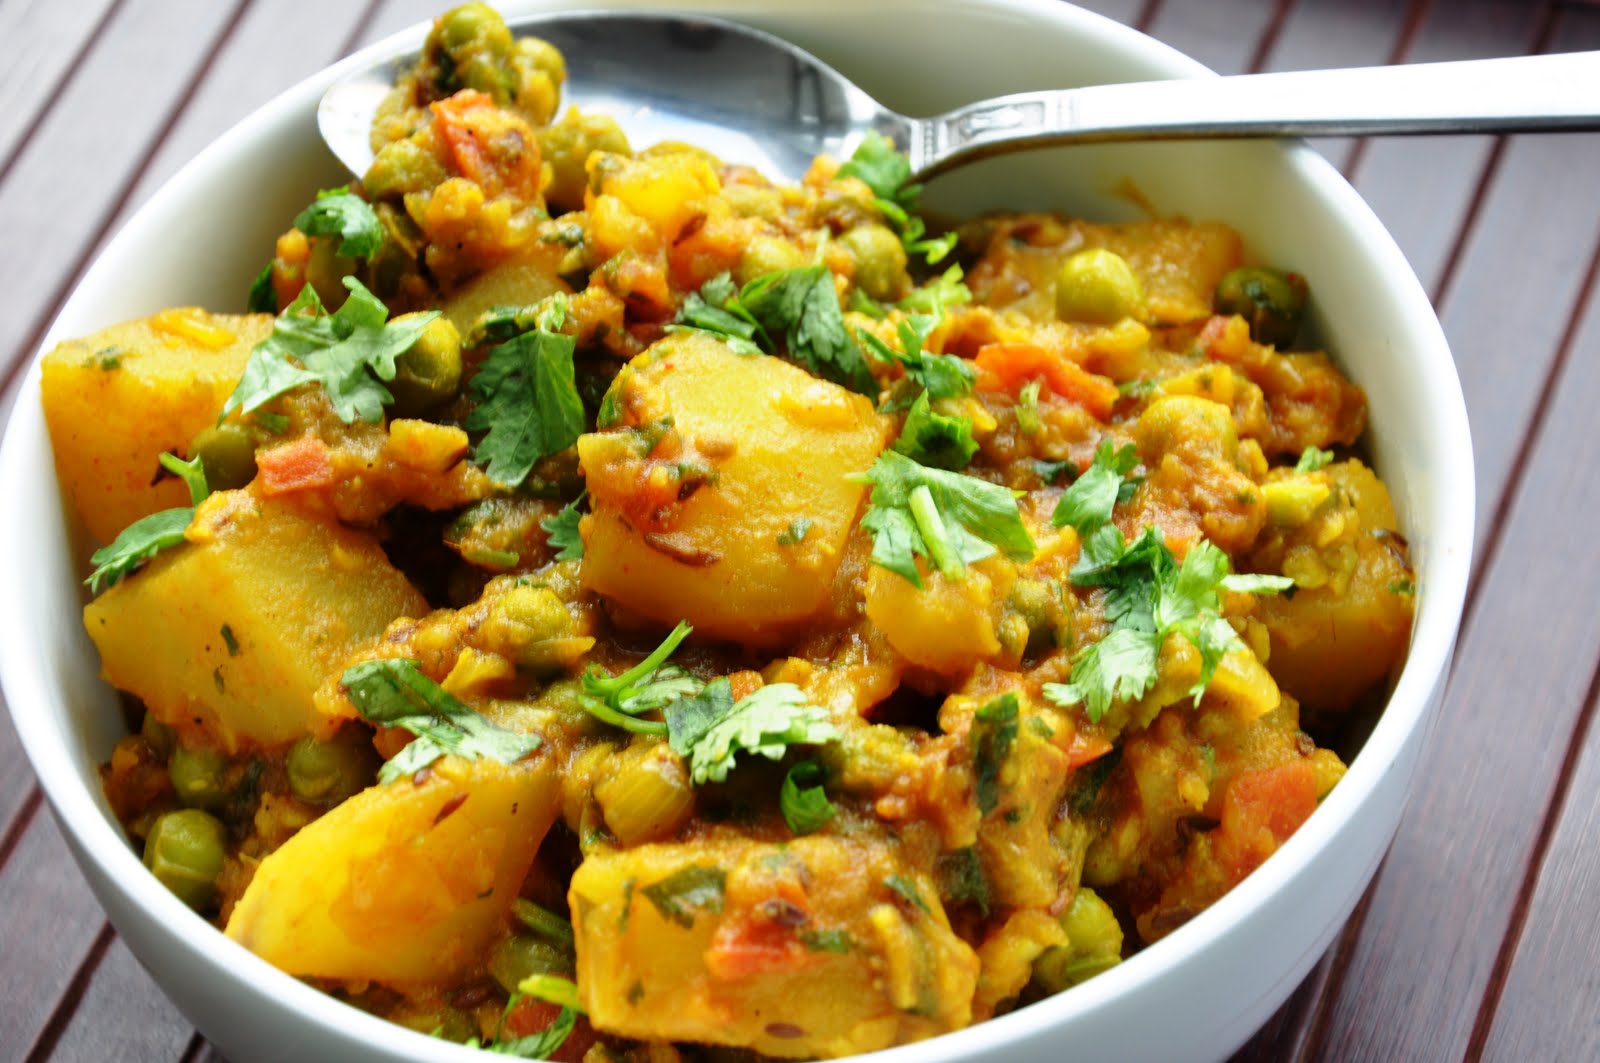 Top 10 Dinner in Indian Recipes, Aloo Matar